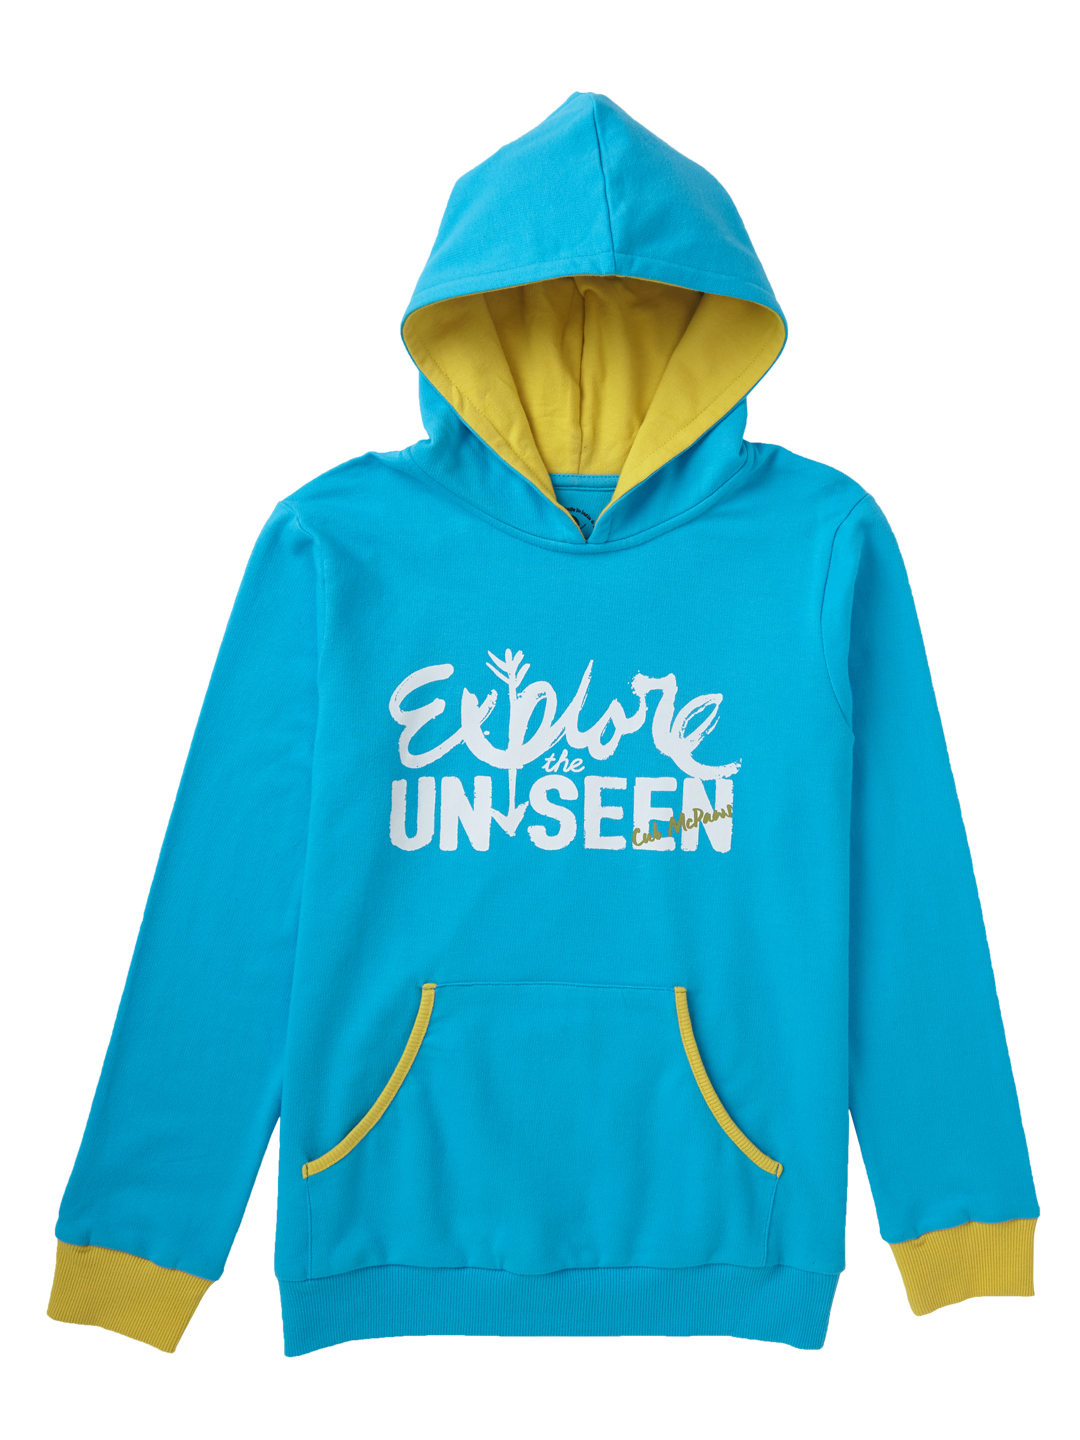 Cool Hoody for Boys Online at Cub McPaws